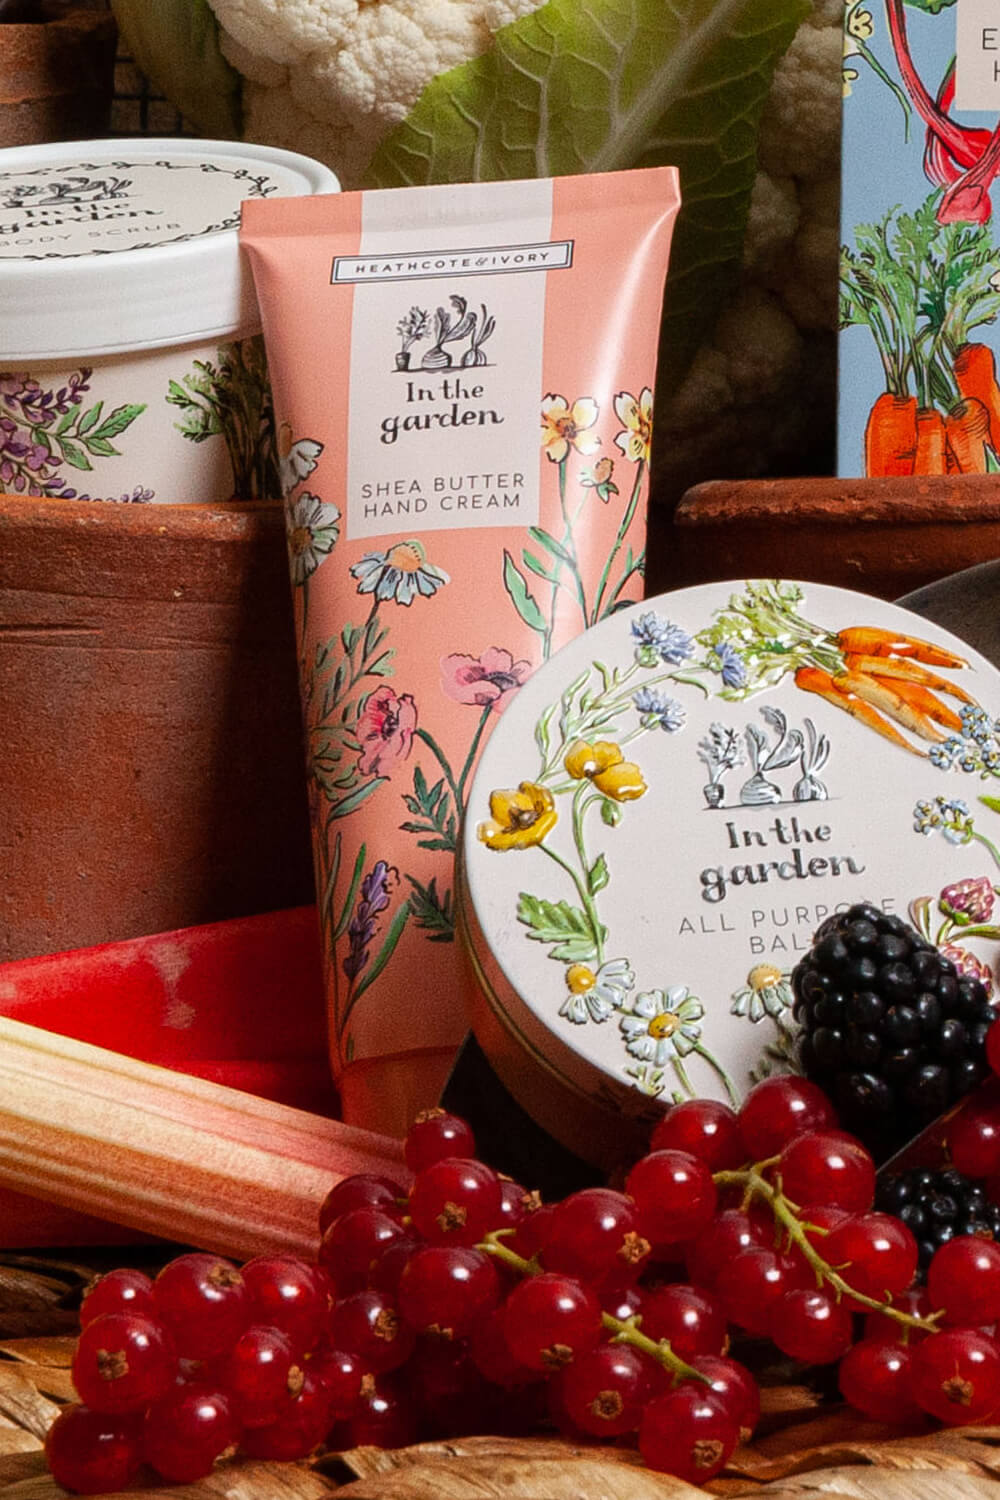  Heathcote & Ivory - In The Garden Shea Butter Hand Cream, Image 5 of 5